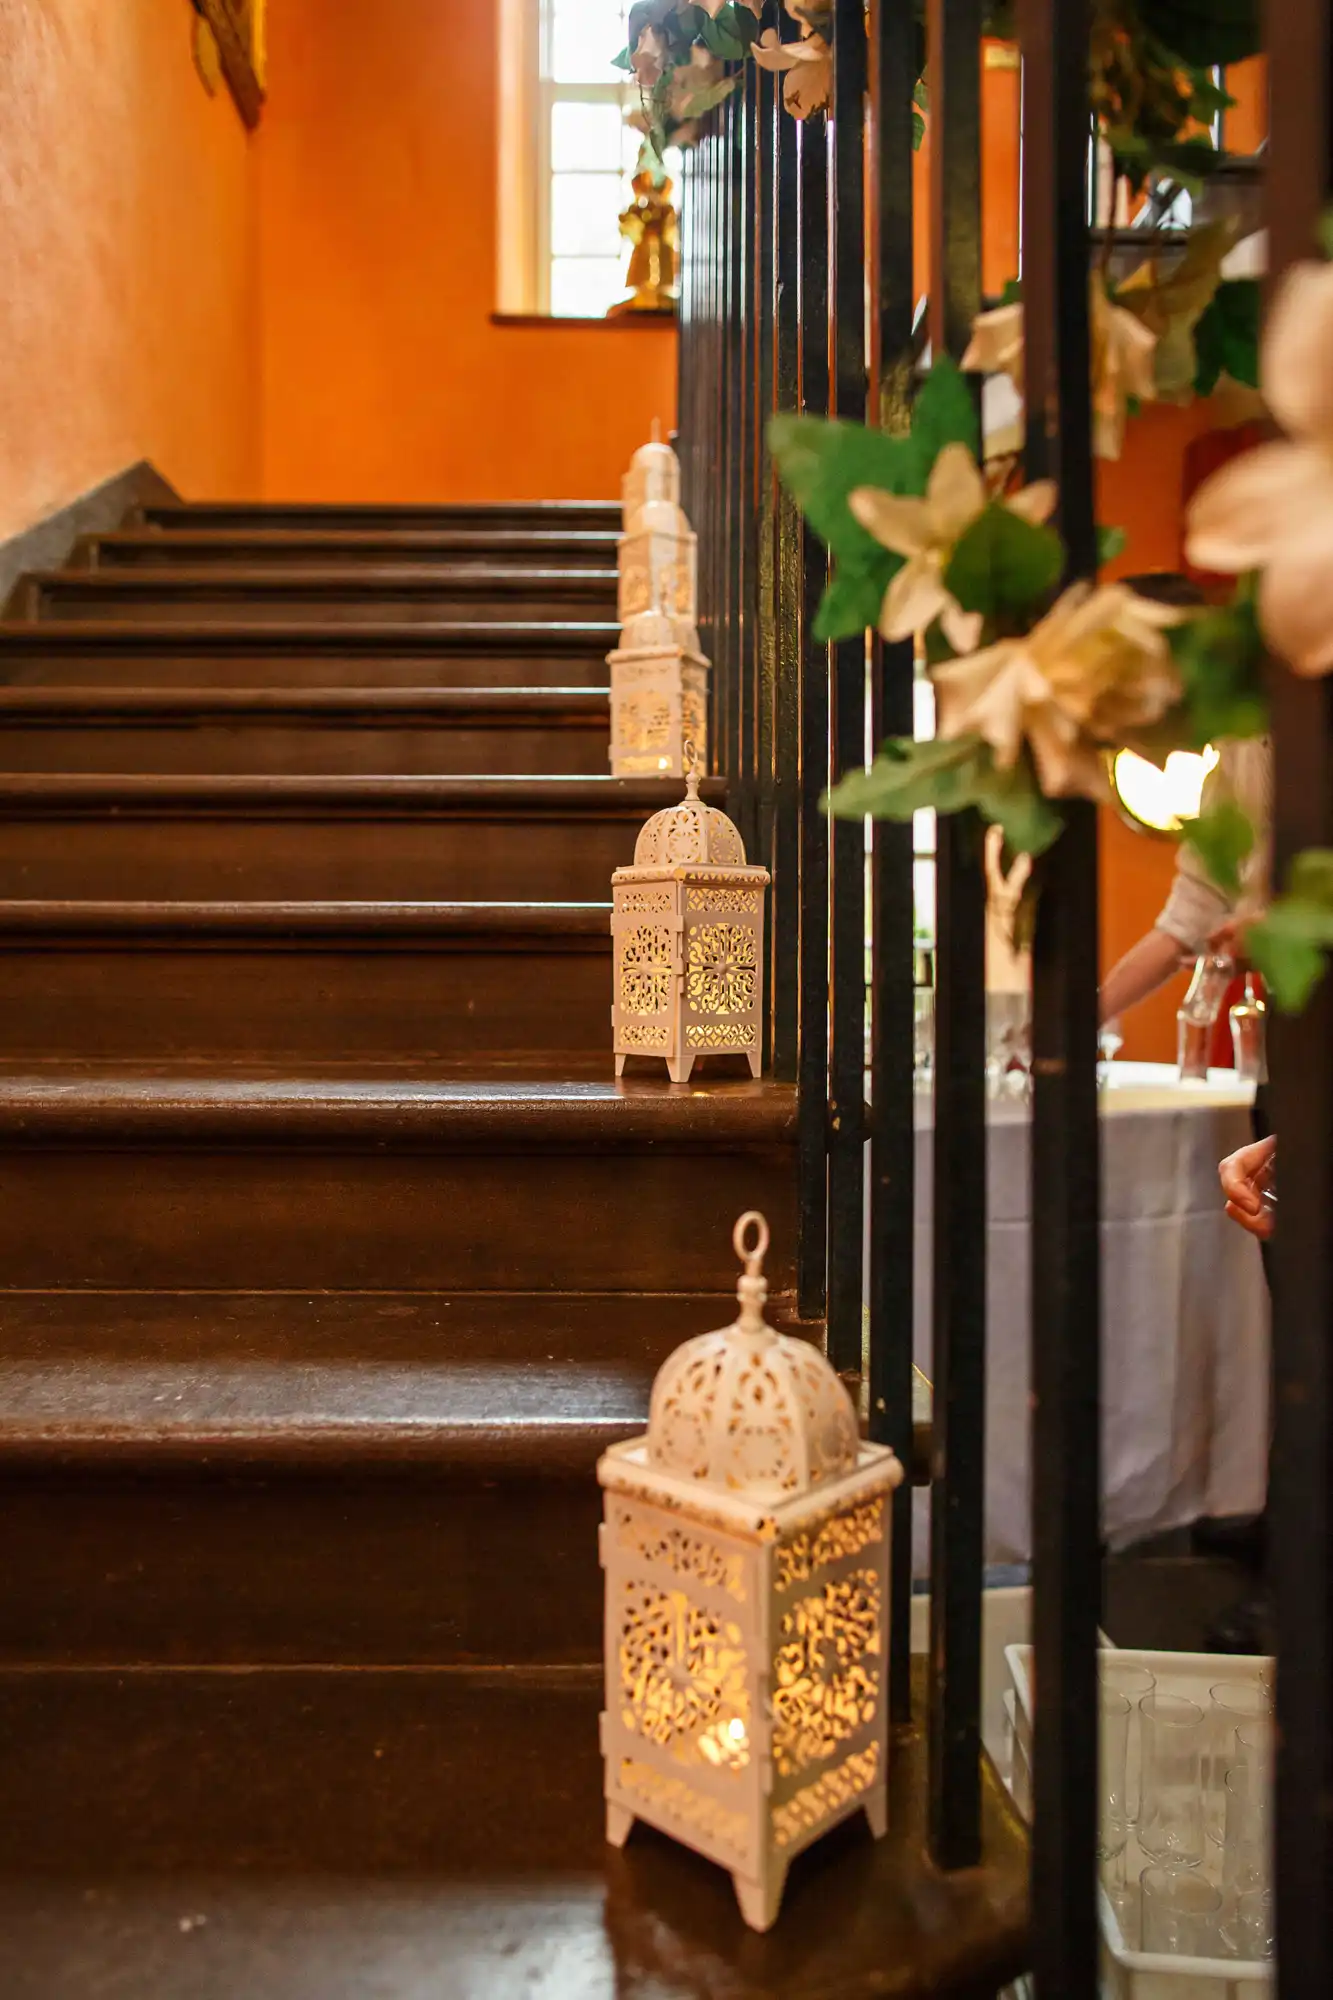 Decorative lanterns on wooden stair steps in a warmly lit indoor setting, with partial view of a railing and floral decor.